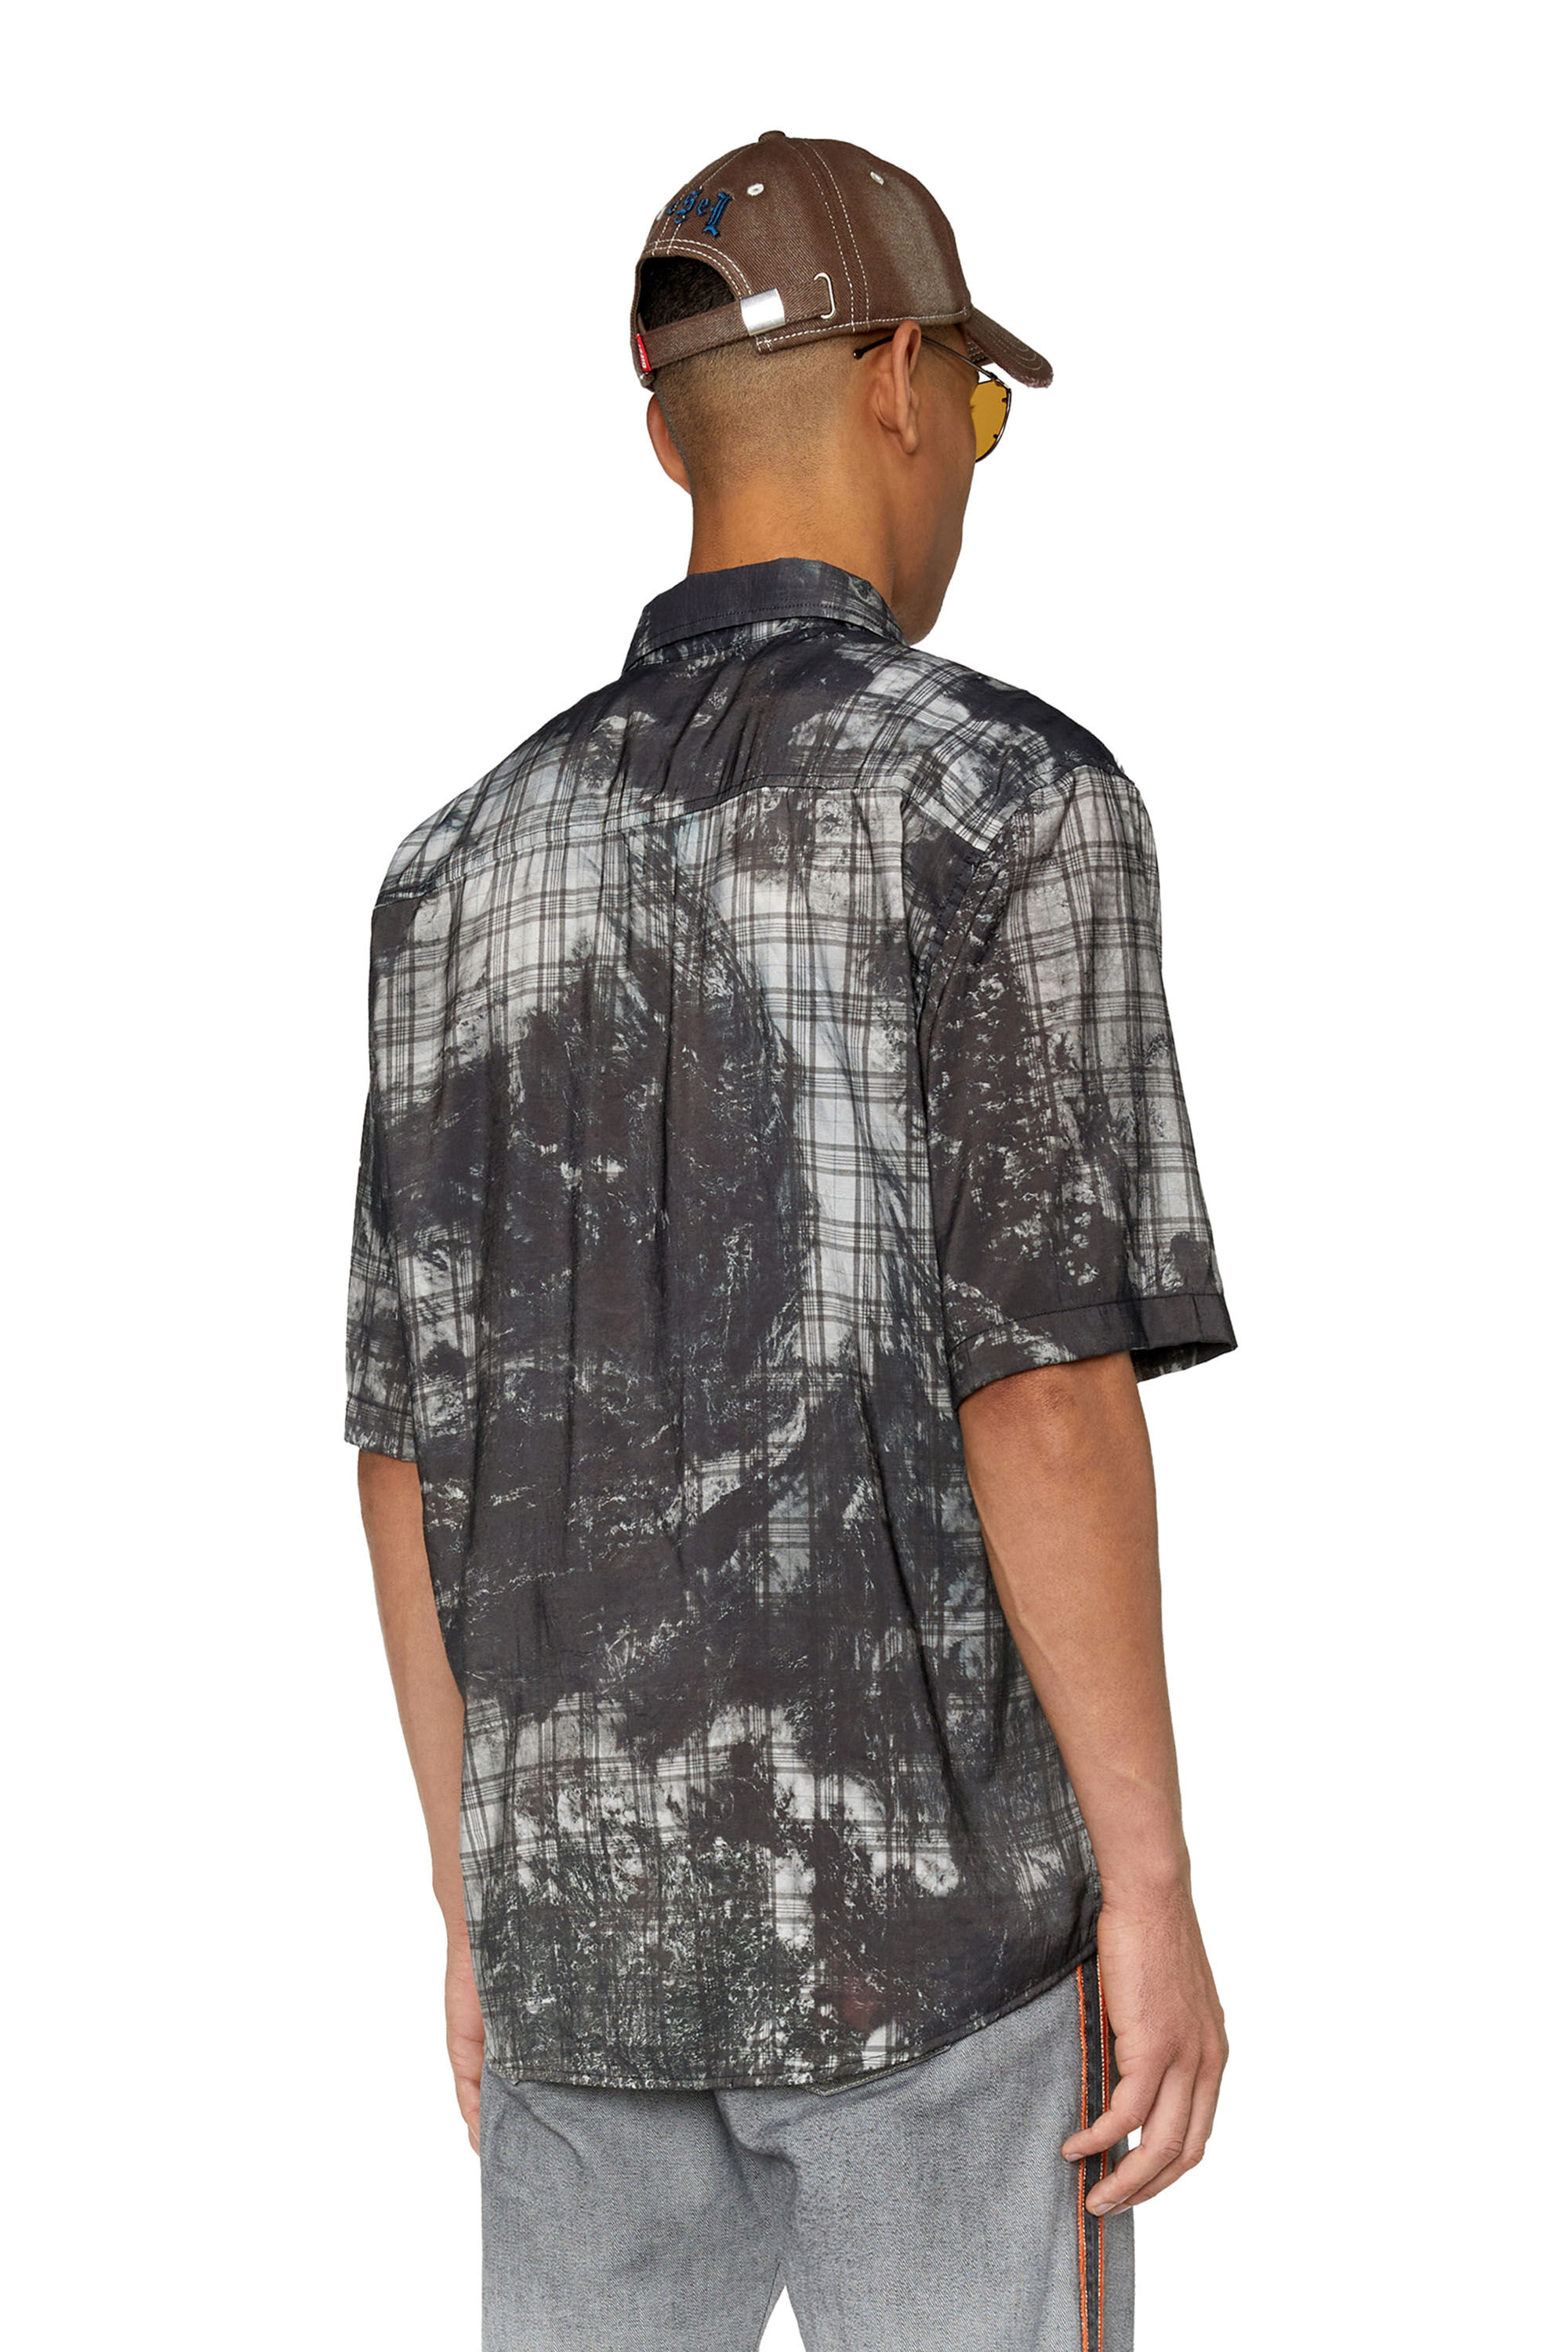 Men's Checked shirt with Planet print | S-UMBE-SSL-GLOBE Diesel